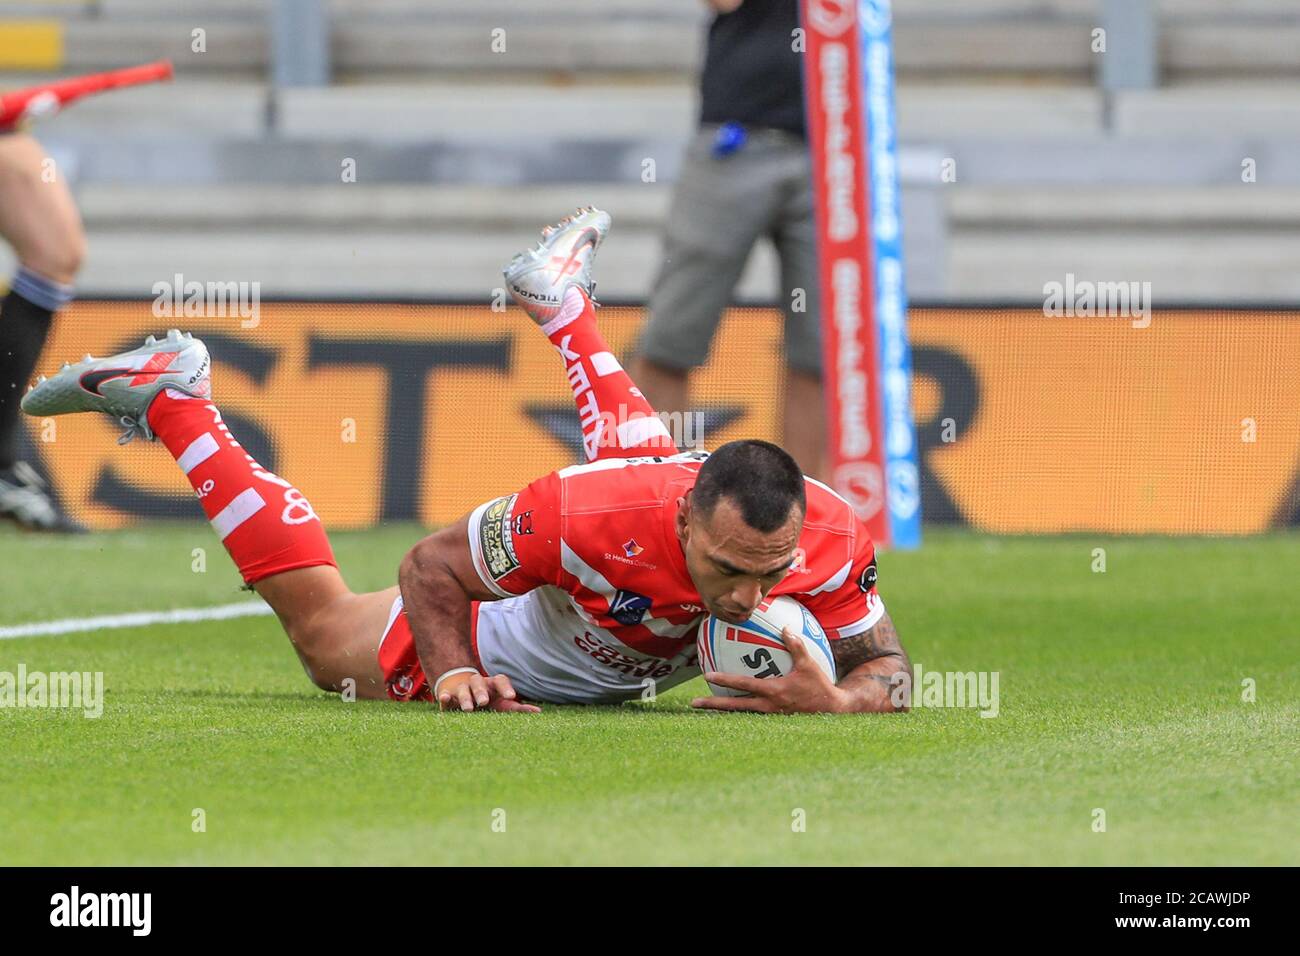 Zeb Taia (11) of St Helens goes over for a try Stock Photo